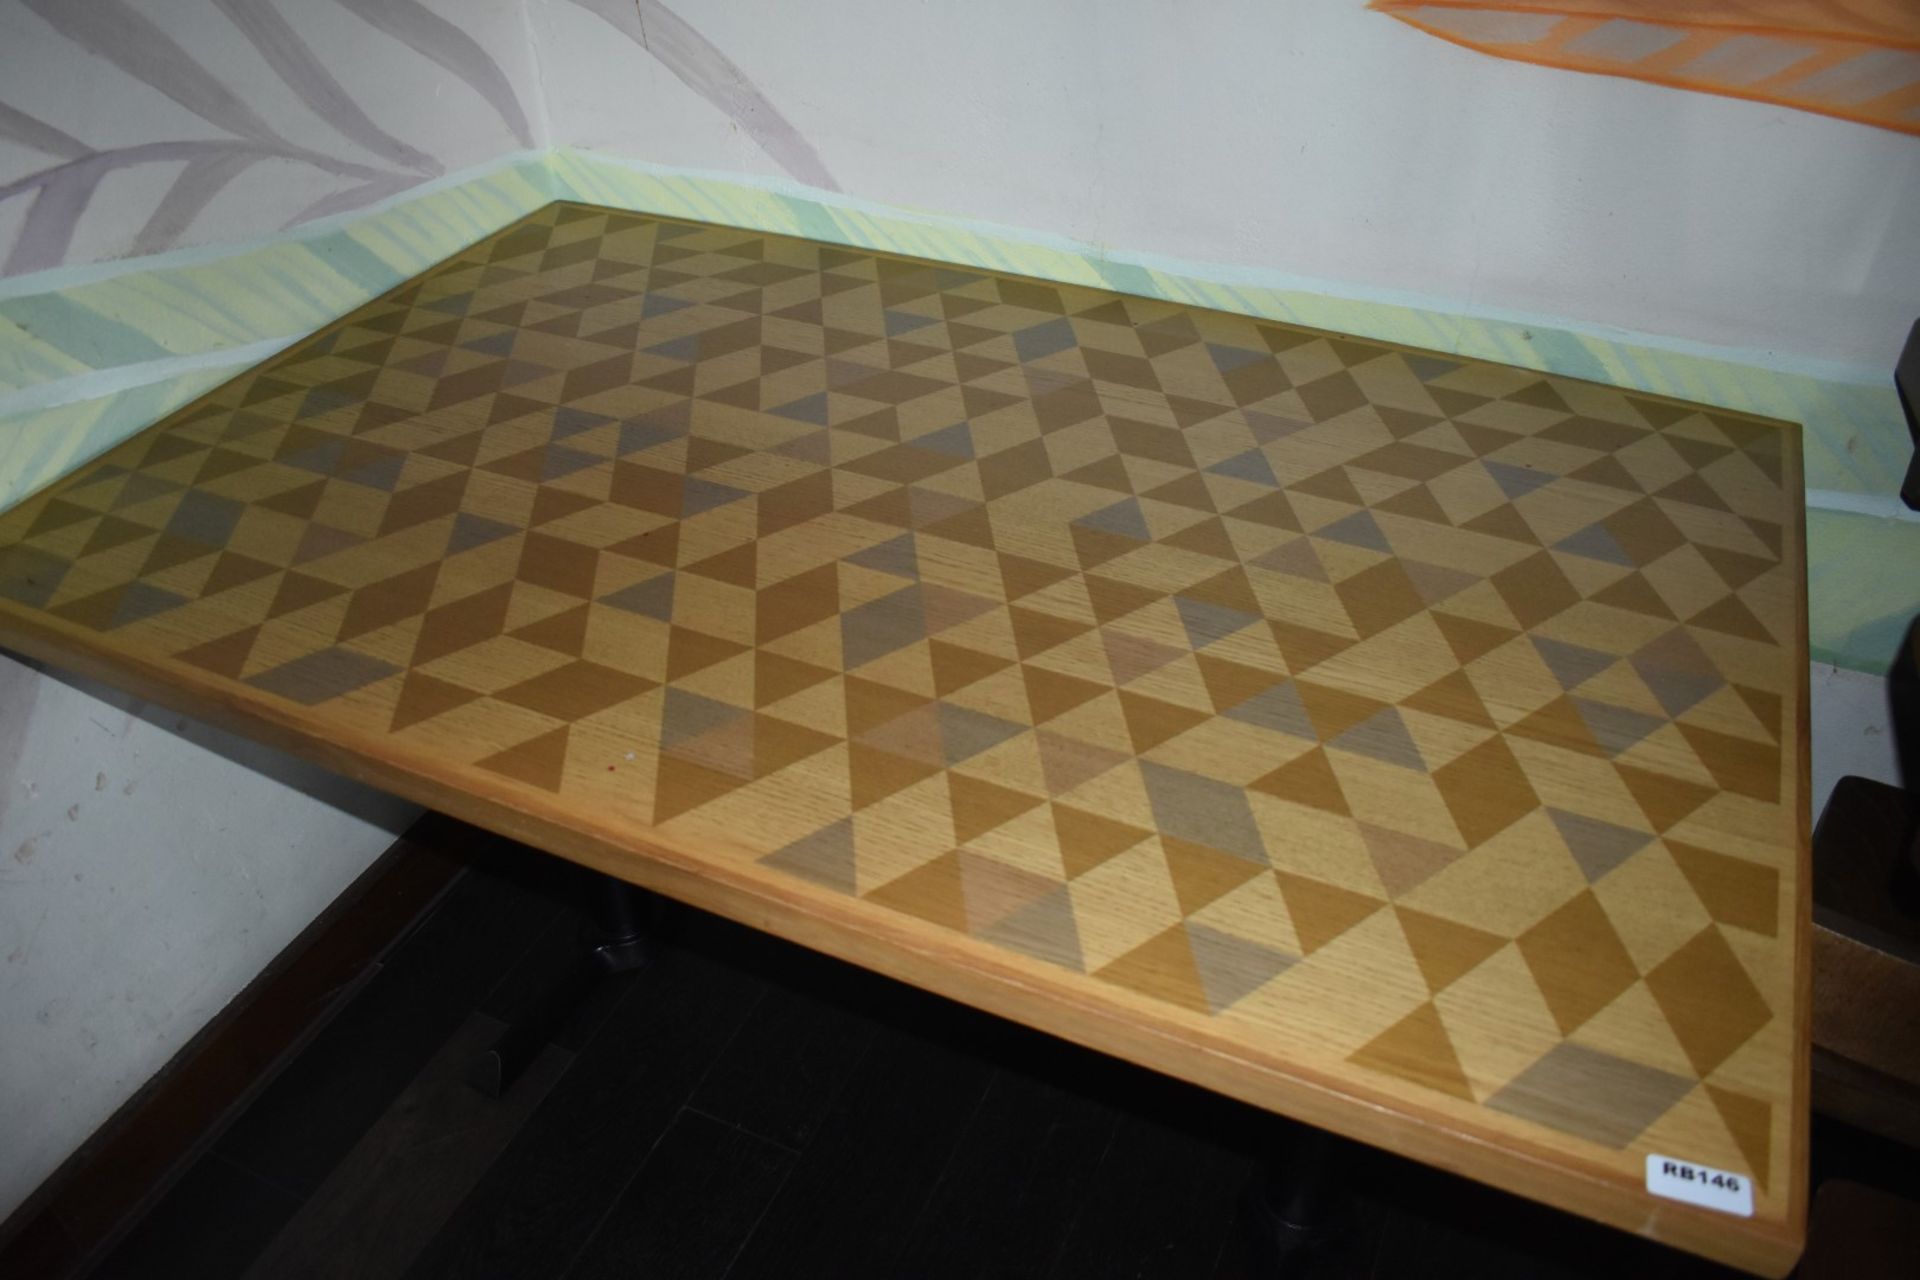 1 x Large Dining Table With Wooden Top, Cast Metal Base and Geometric Design - Size H77 x W140 x D90 - Image 3 of 3